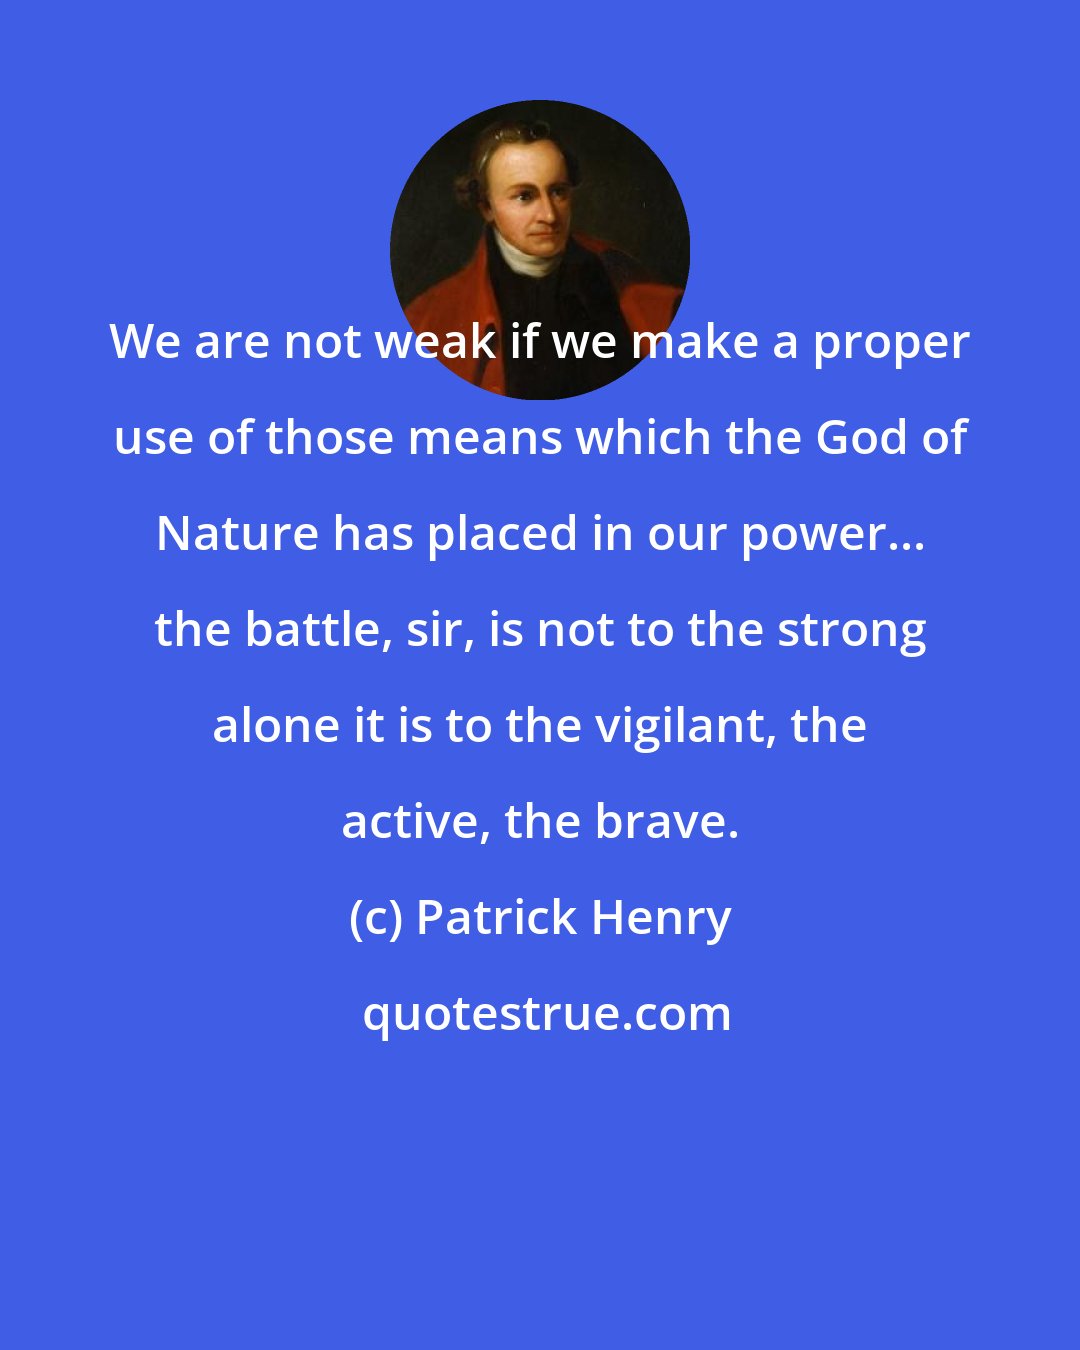 Patrick Henry: We are not weak if we make a proper use of those means which the God of Nature has placed in our power... the battle, sir, is not to the strong alone it is to the vigilant, the active, the brave.